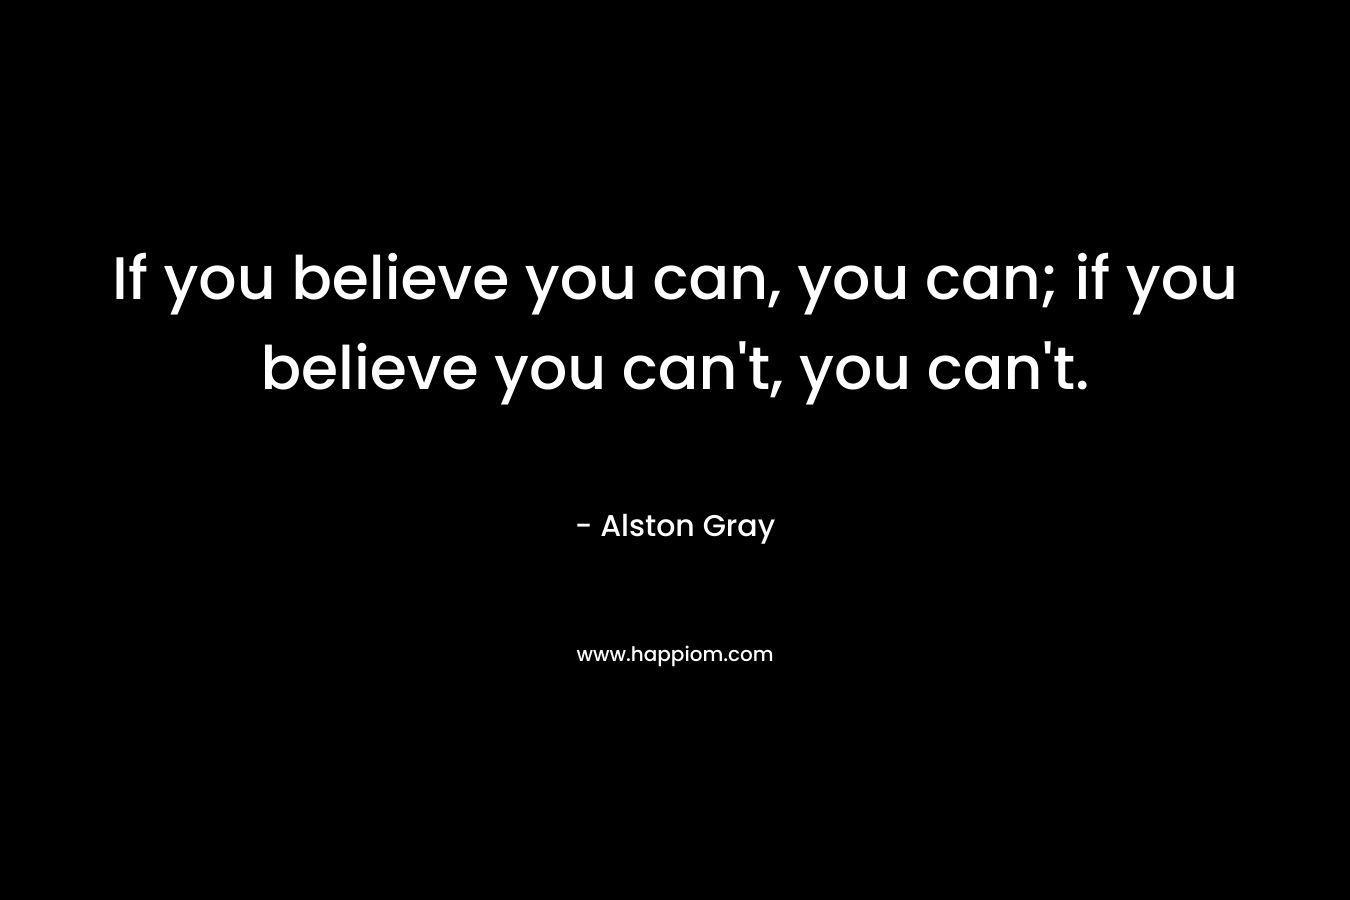 If you believe you can, you can; if you believe you can't, you can't.